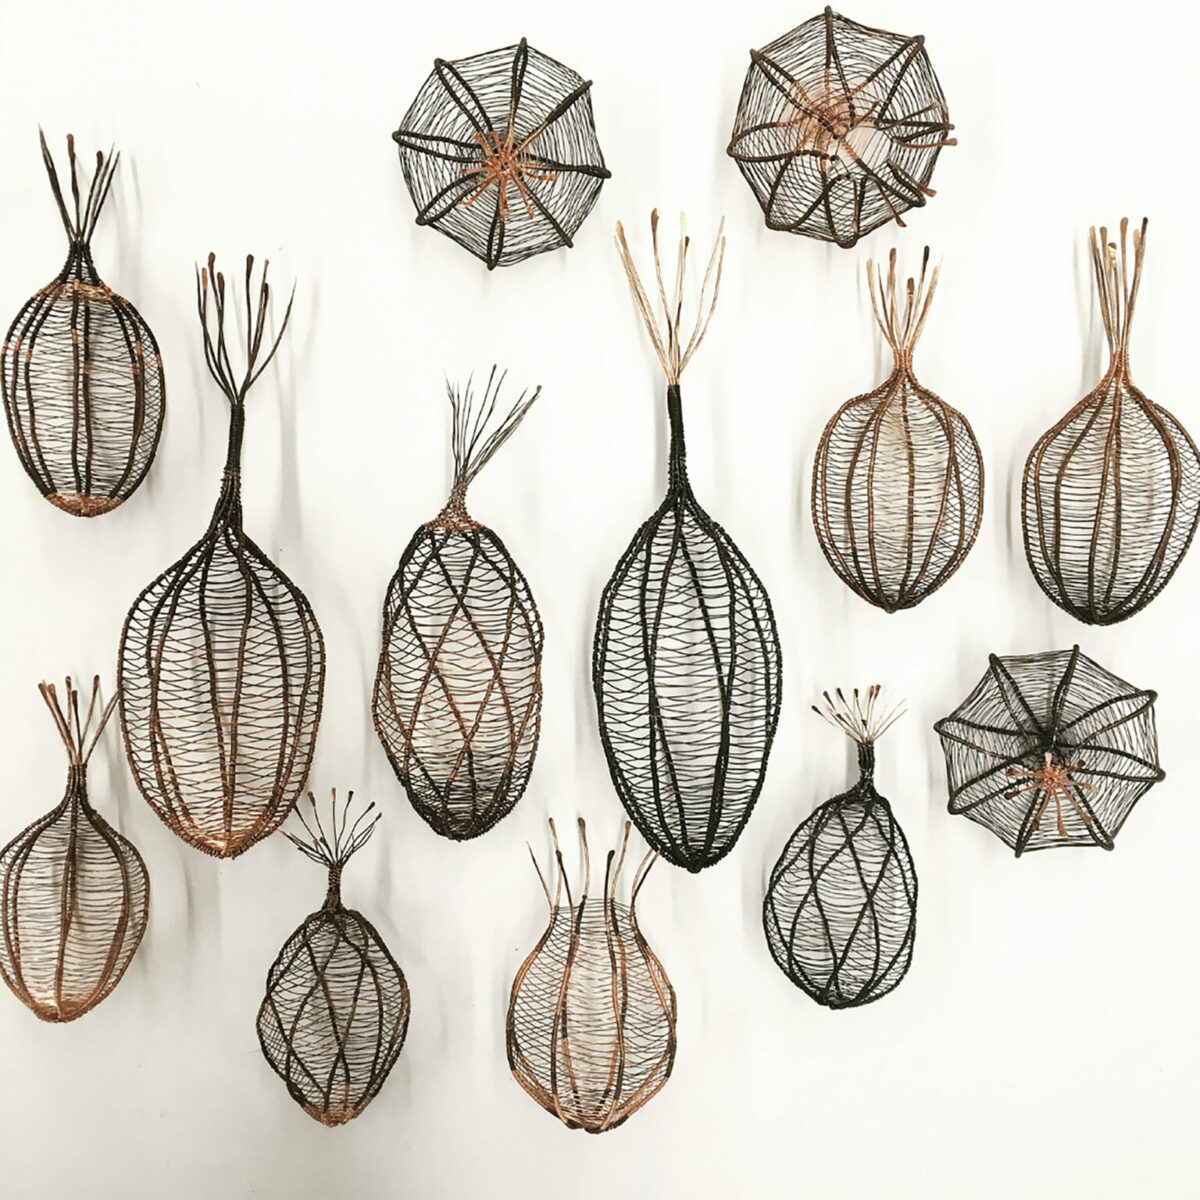 Fascinating Organic Shaped Copper Wire Sculptures By Sally Blake 11